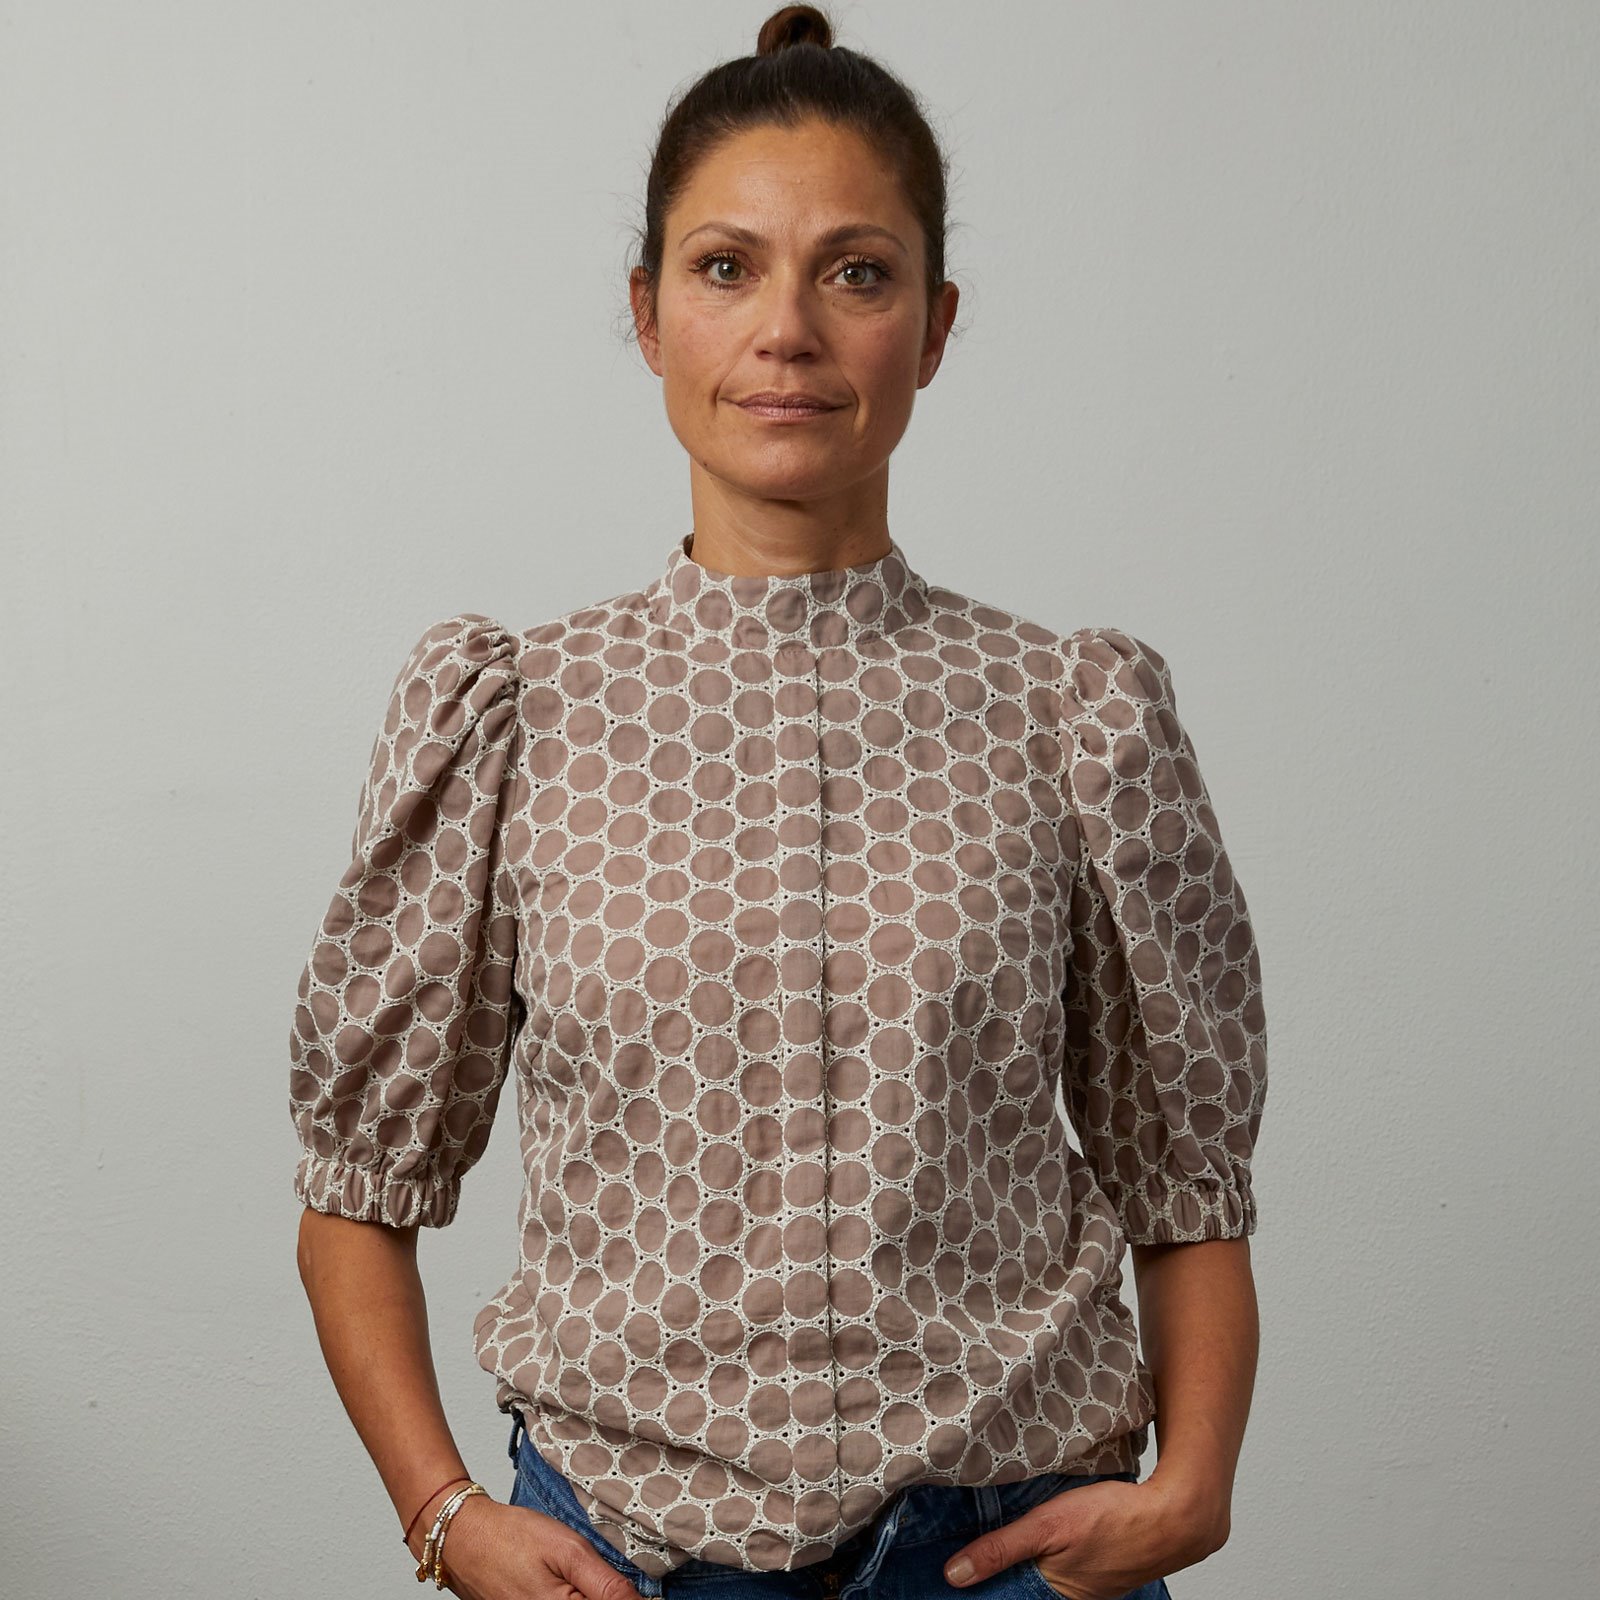 Design your own blouse, 40/12 p22075_cg_image_a.jpg